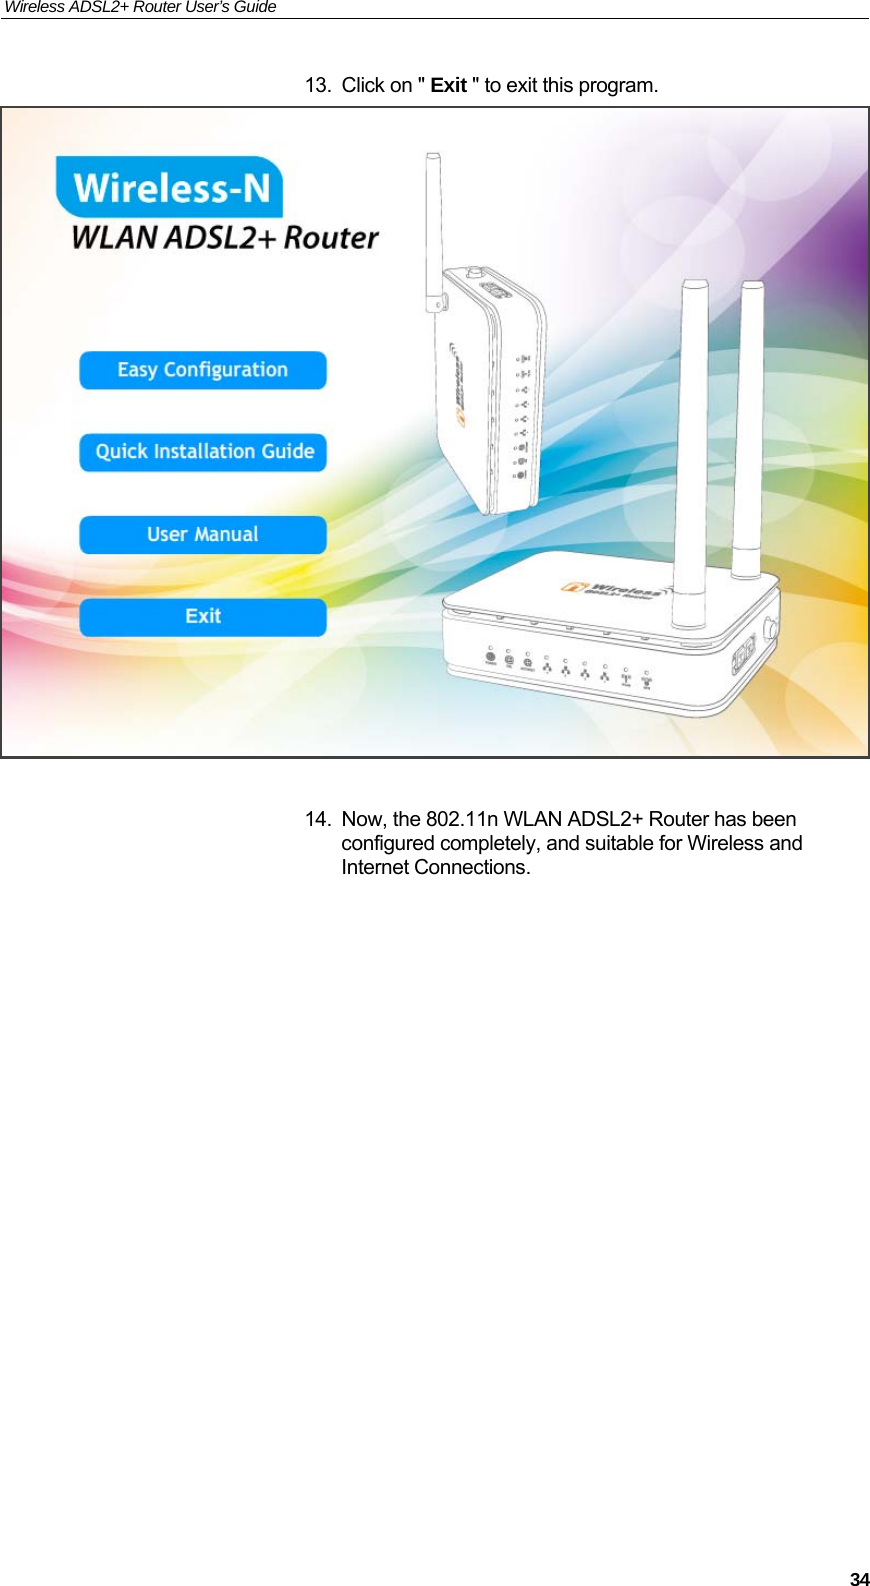 Wireless ADSL2+ Router User’s Guide     3413.  Click on &quot; Exit &quot; to exit this program.   14.  Now, the 802.11n WLAN ADSL2+ Router has been configured completely, and suitable for Wireless and Internet Connections.                